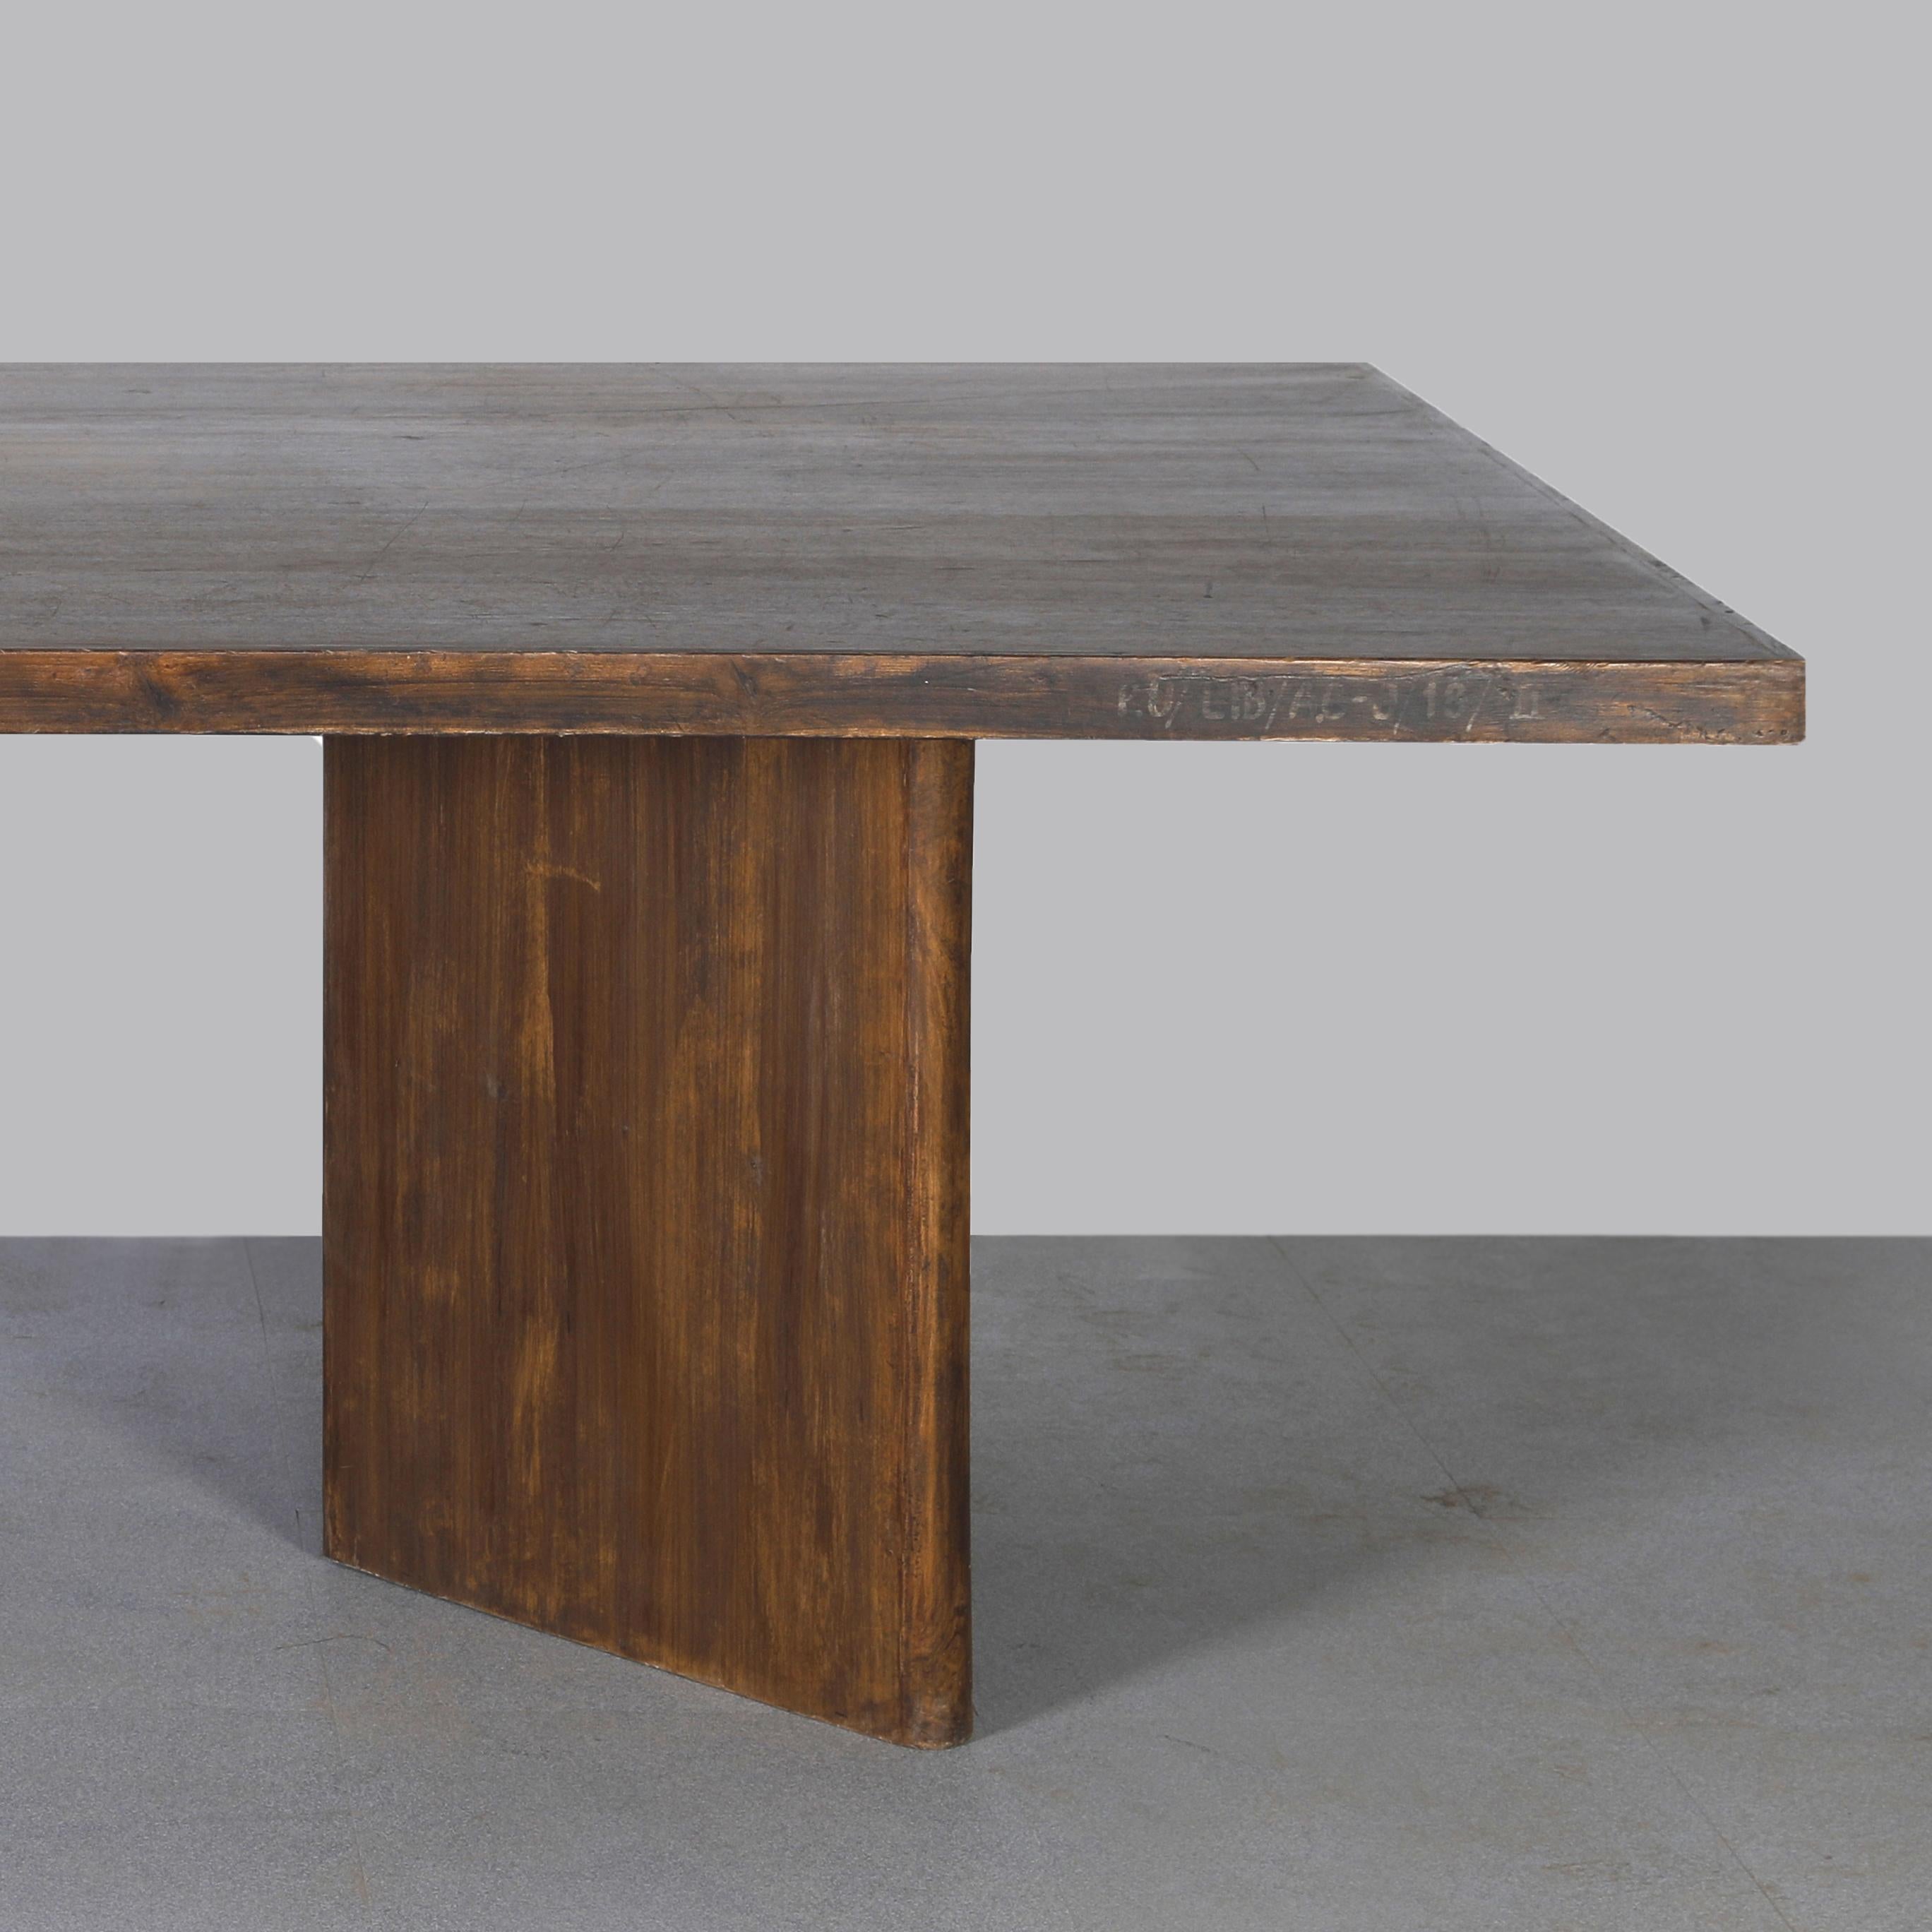 Indian Pierre Jeanneret  PJ-TAT-08-A Table / Mid-Century Modern  For Sale